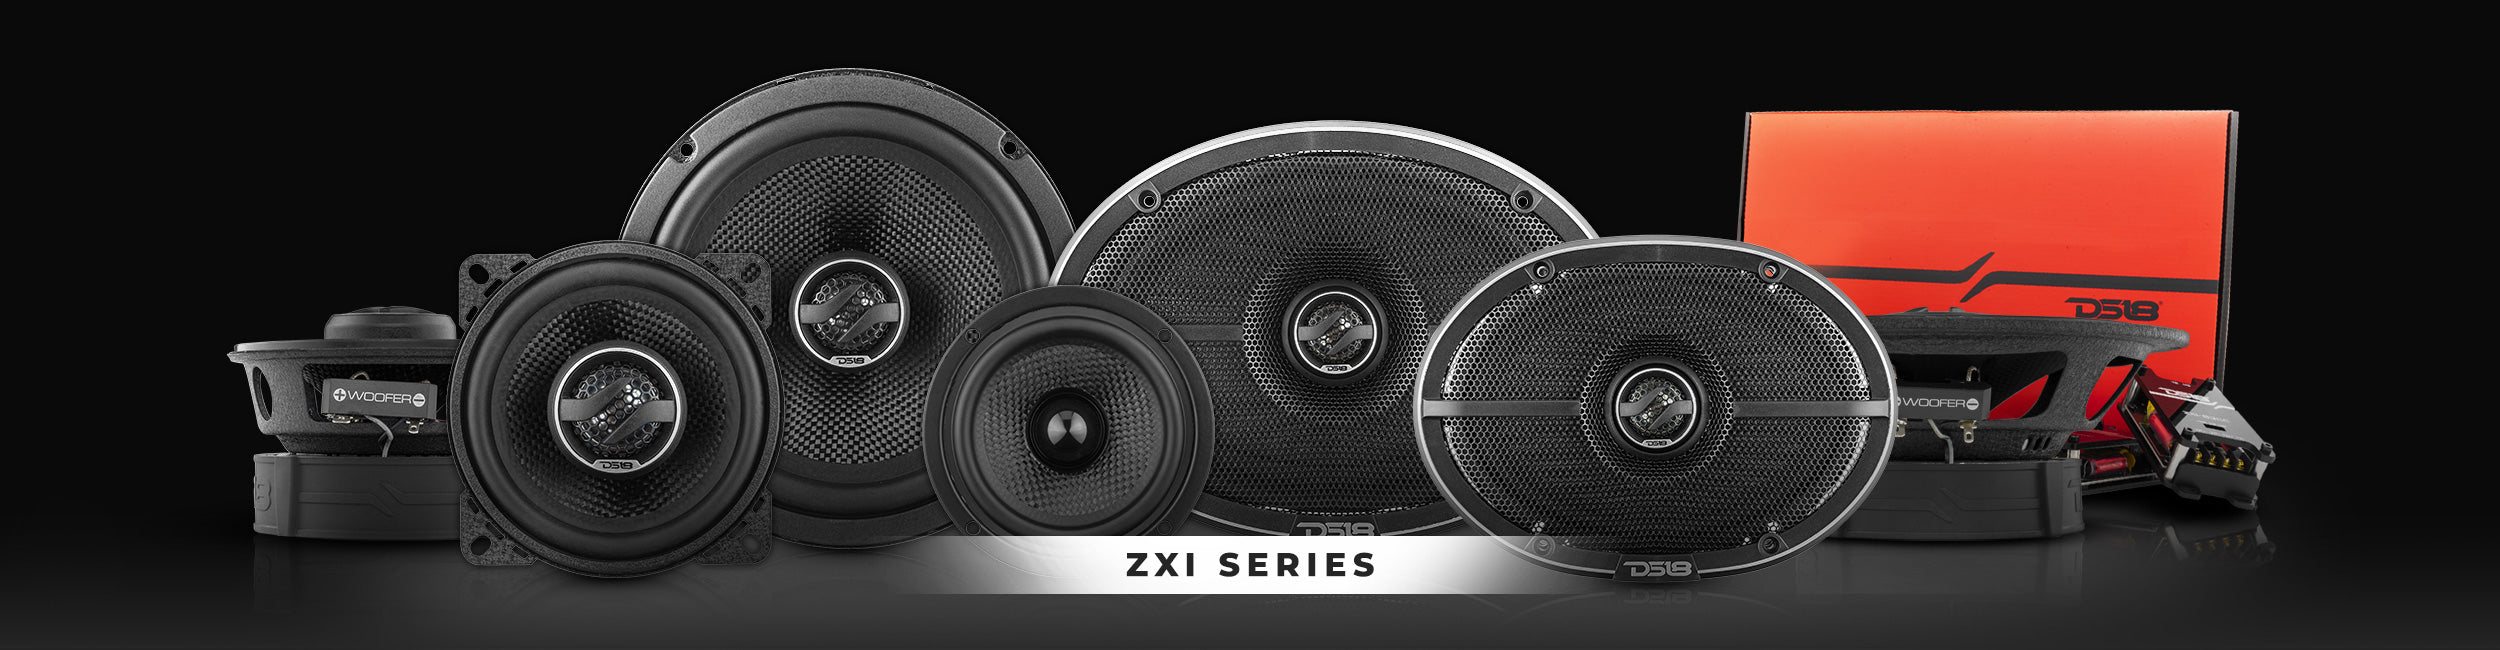 DS18 ZXI COAXIAL SPEAKERS